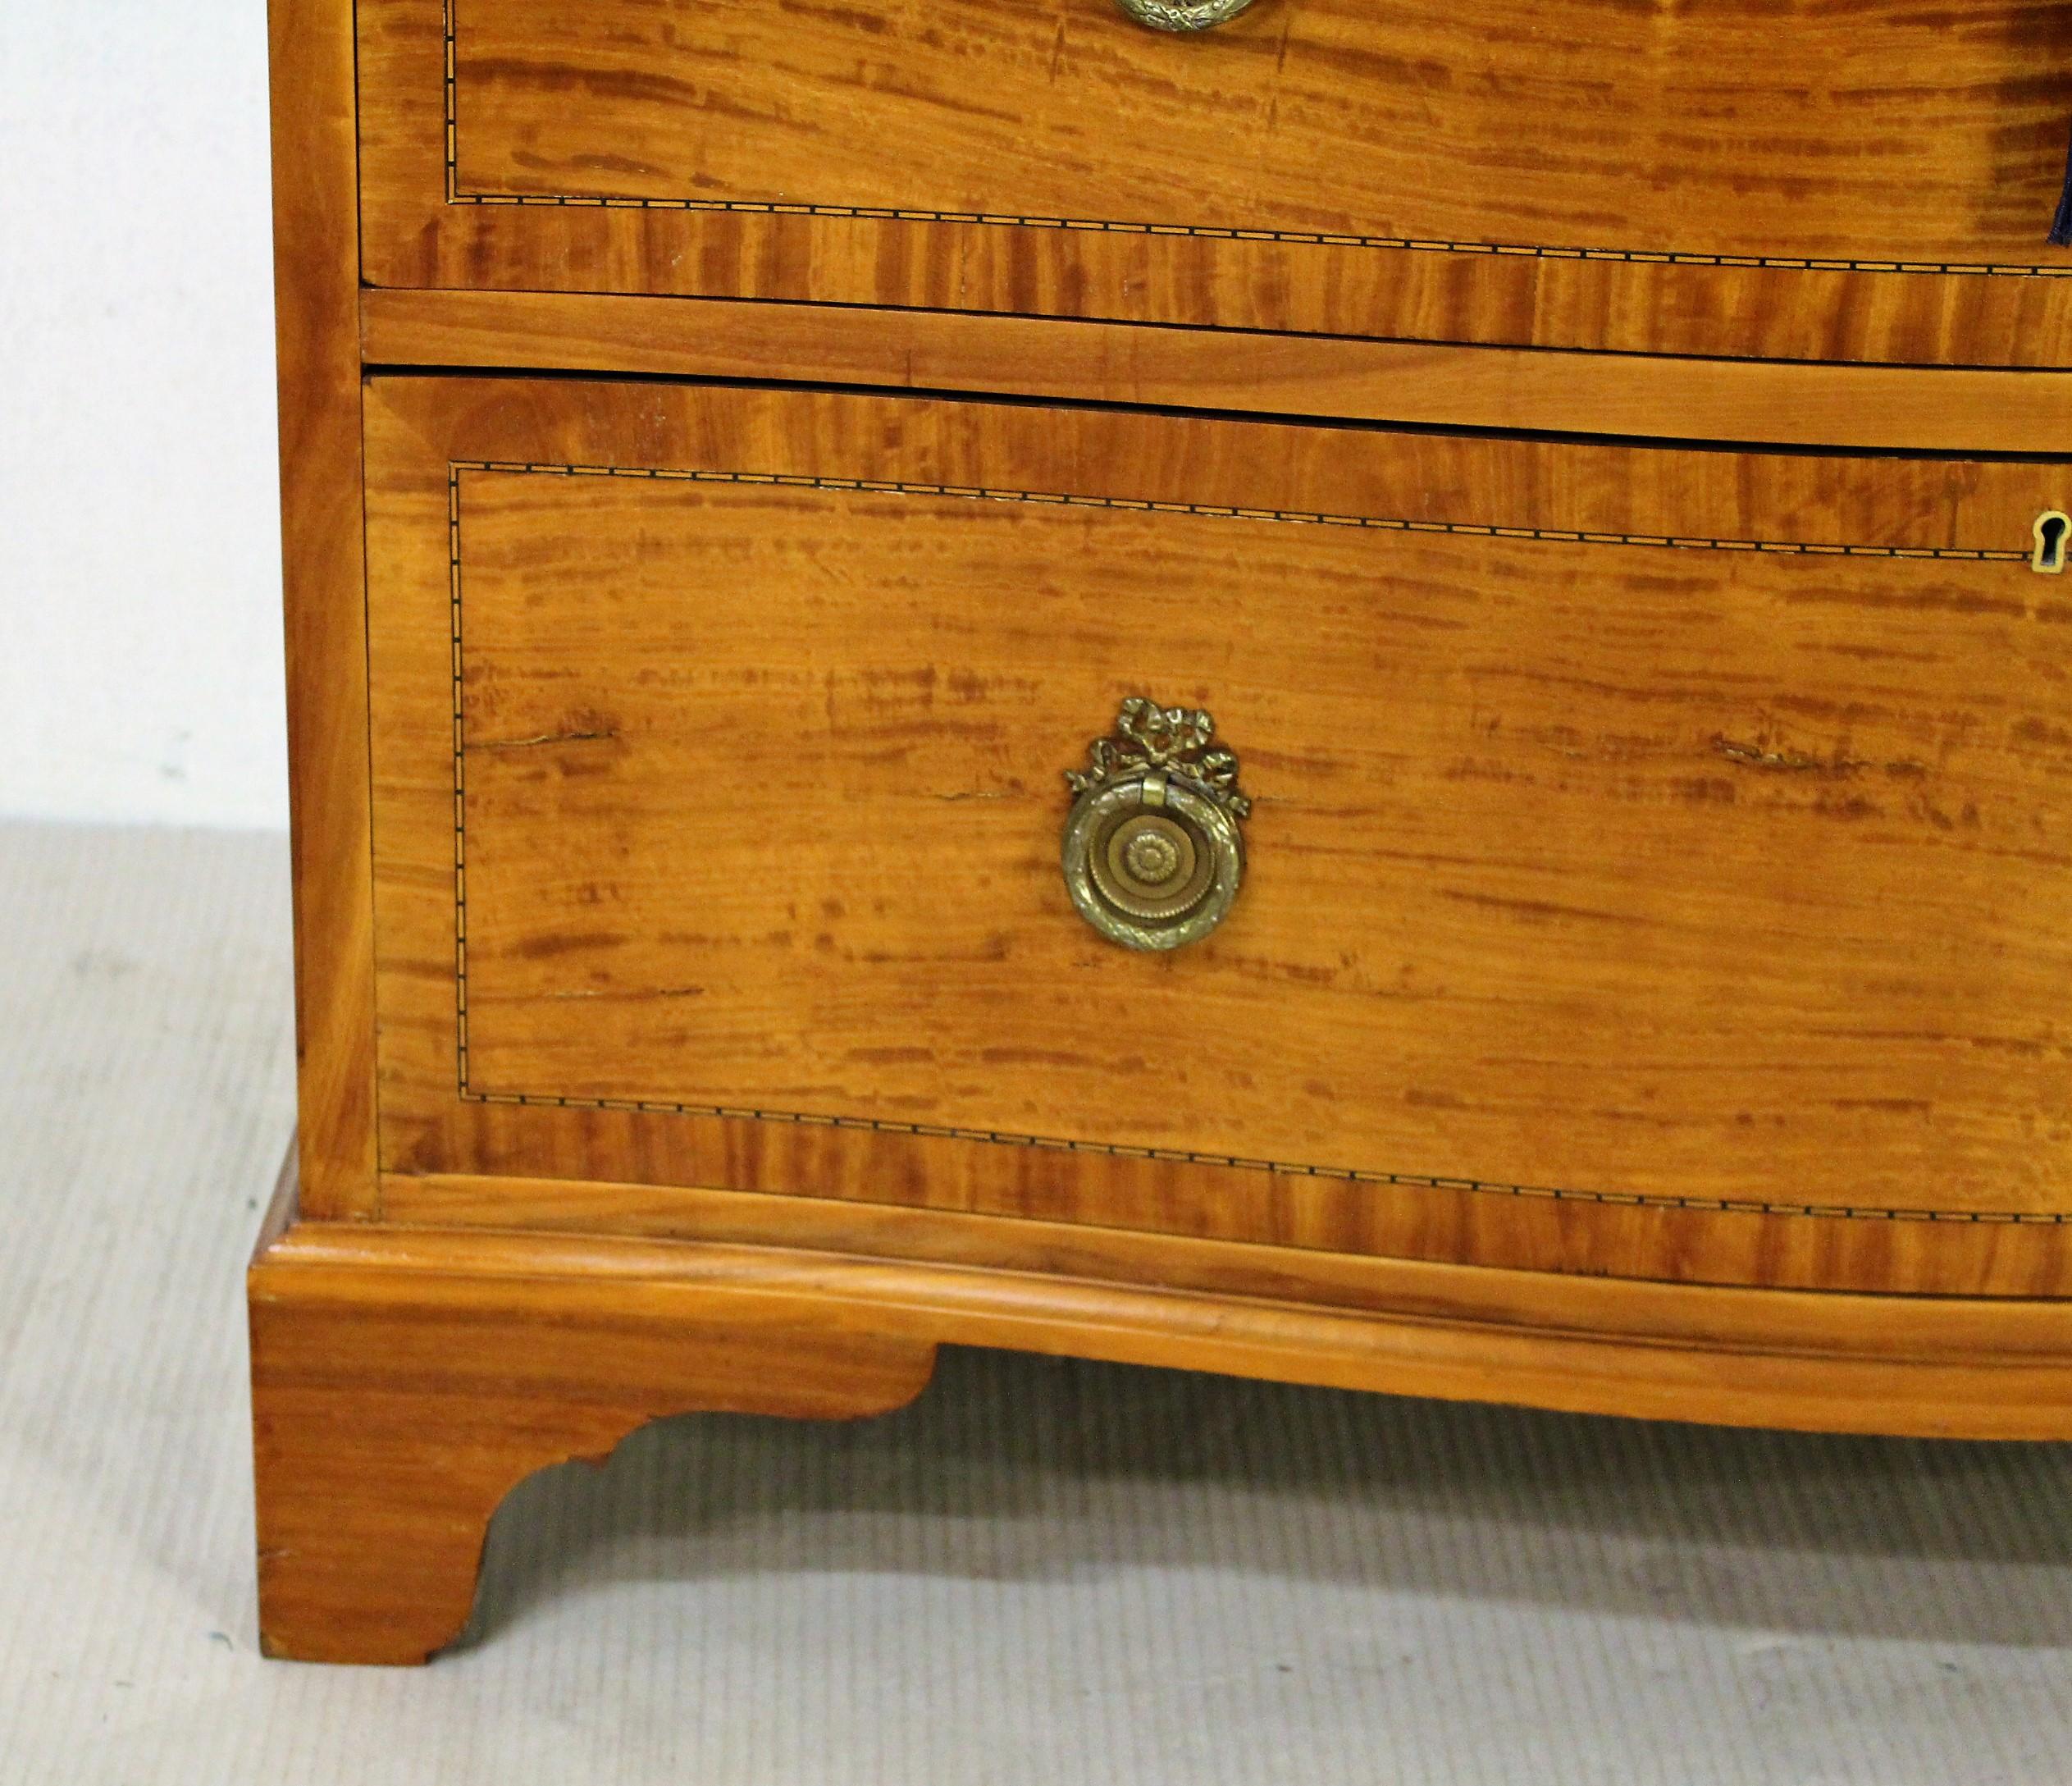 Early 20th Century English Edwardian Period Inlaid Satinwood Serpentine Fronted Chest of Drawers